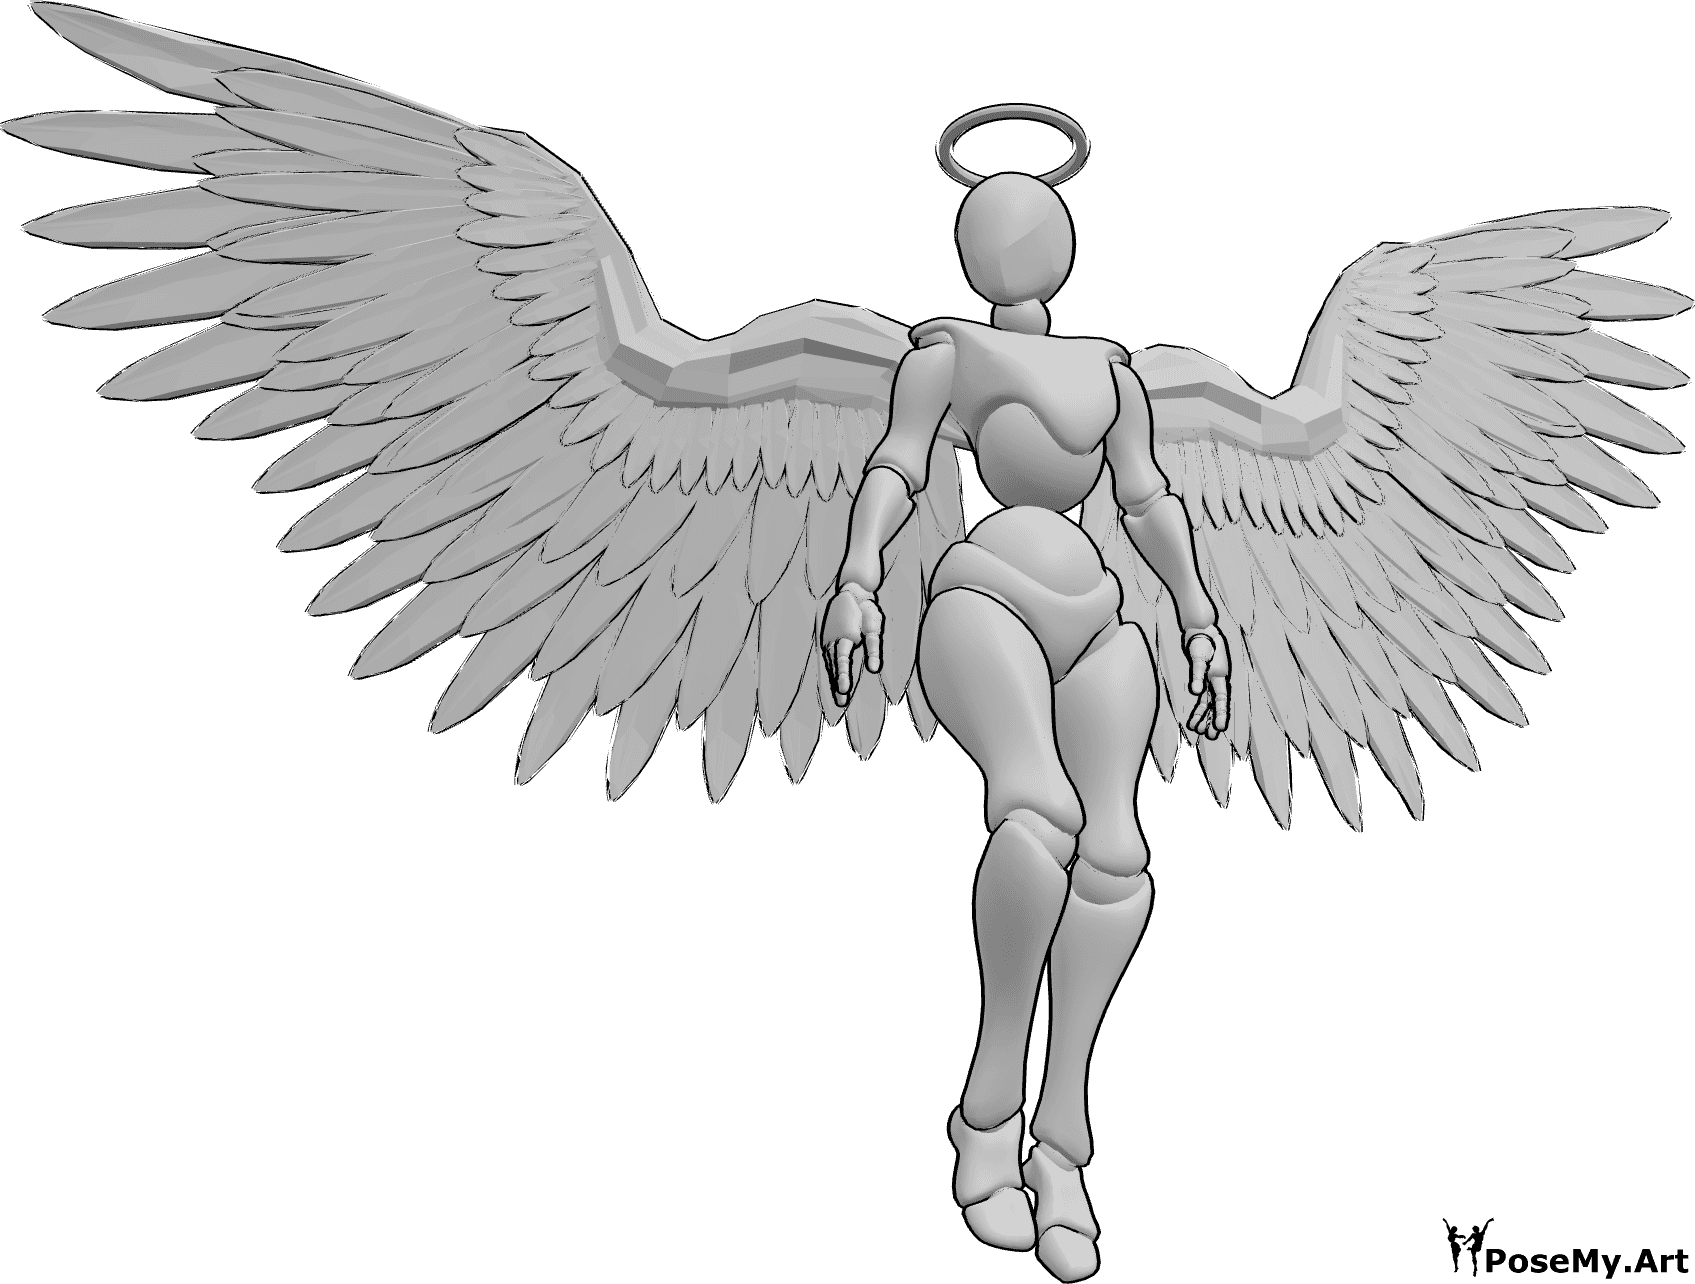 Pose Reference- Female angel wings pose - Female with angel wings and halo floating in the air and looking to the right